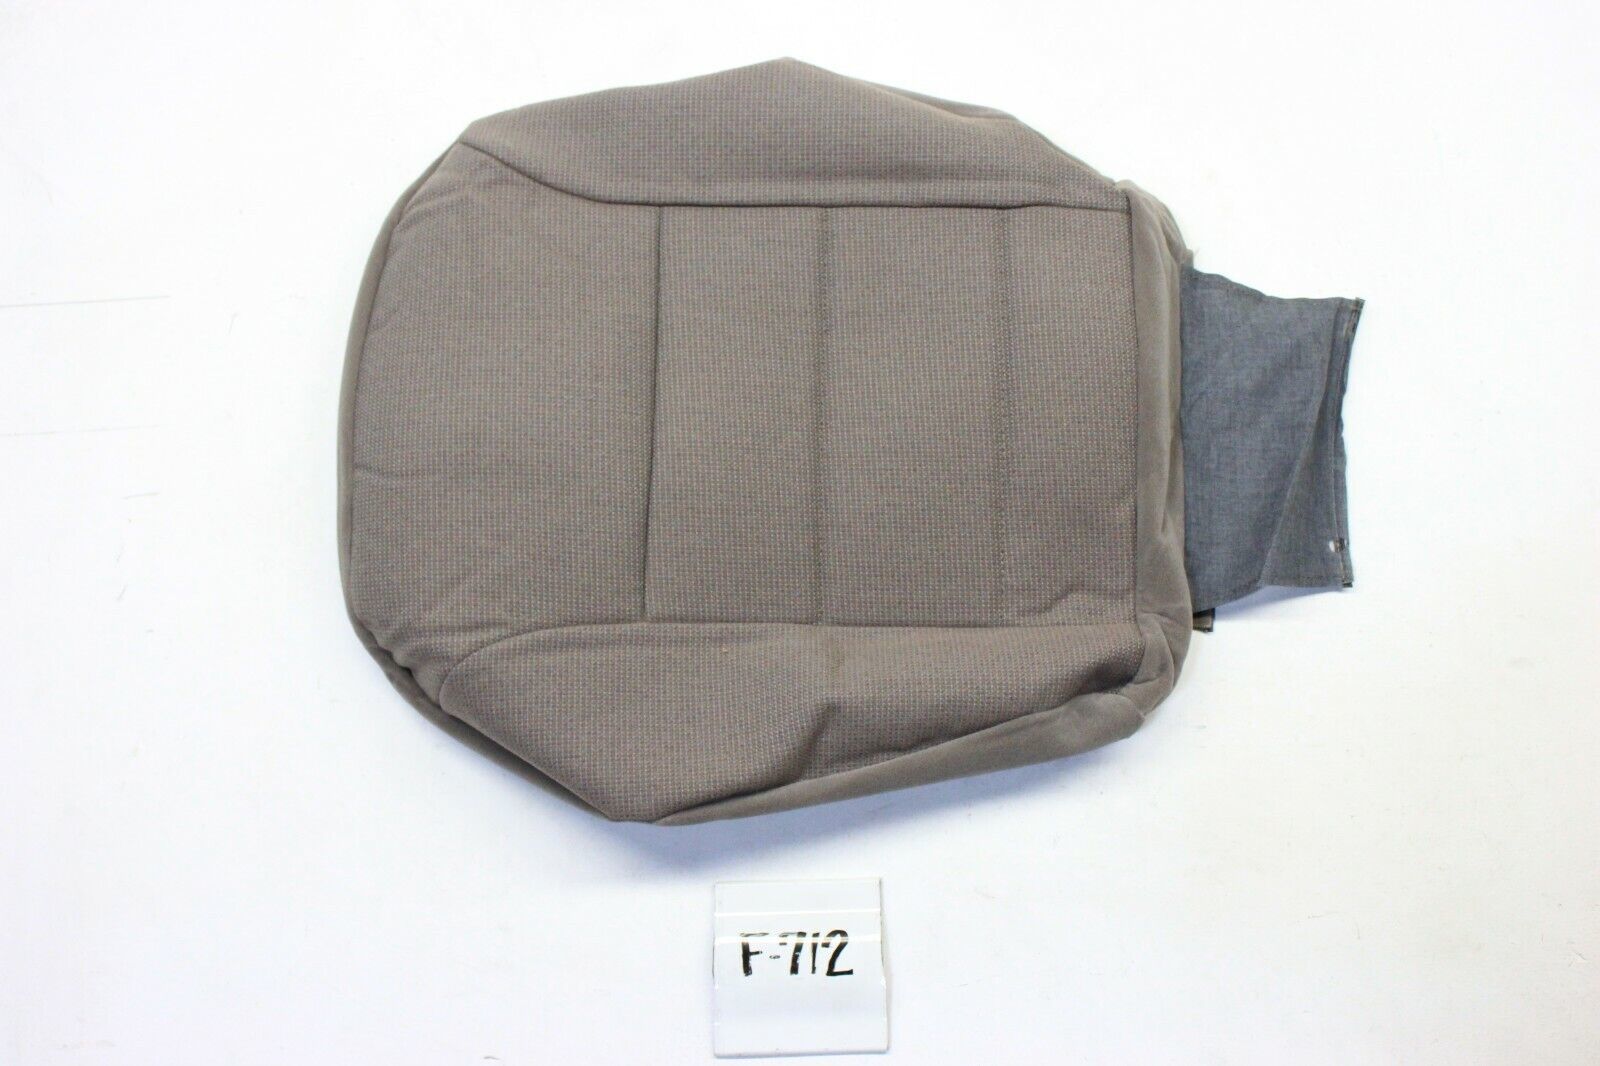 New OEM Front Cloth Seat Cover Upper LH Kia Sportage 2000-2002 0K08A88145C702 - $54.45